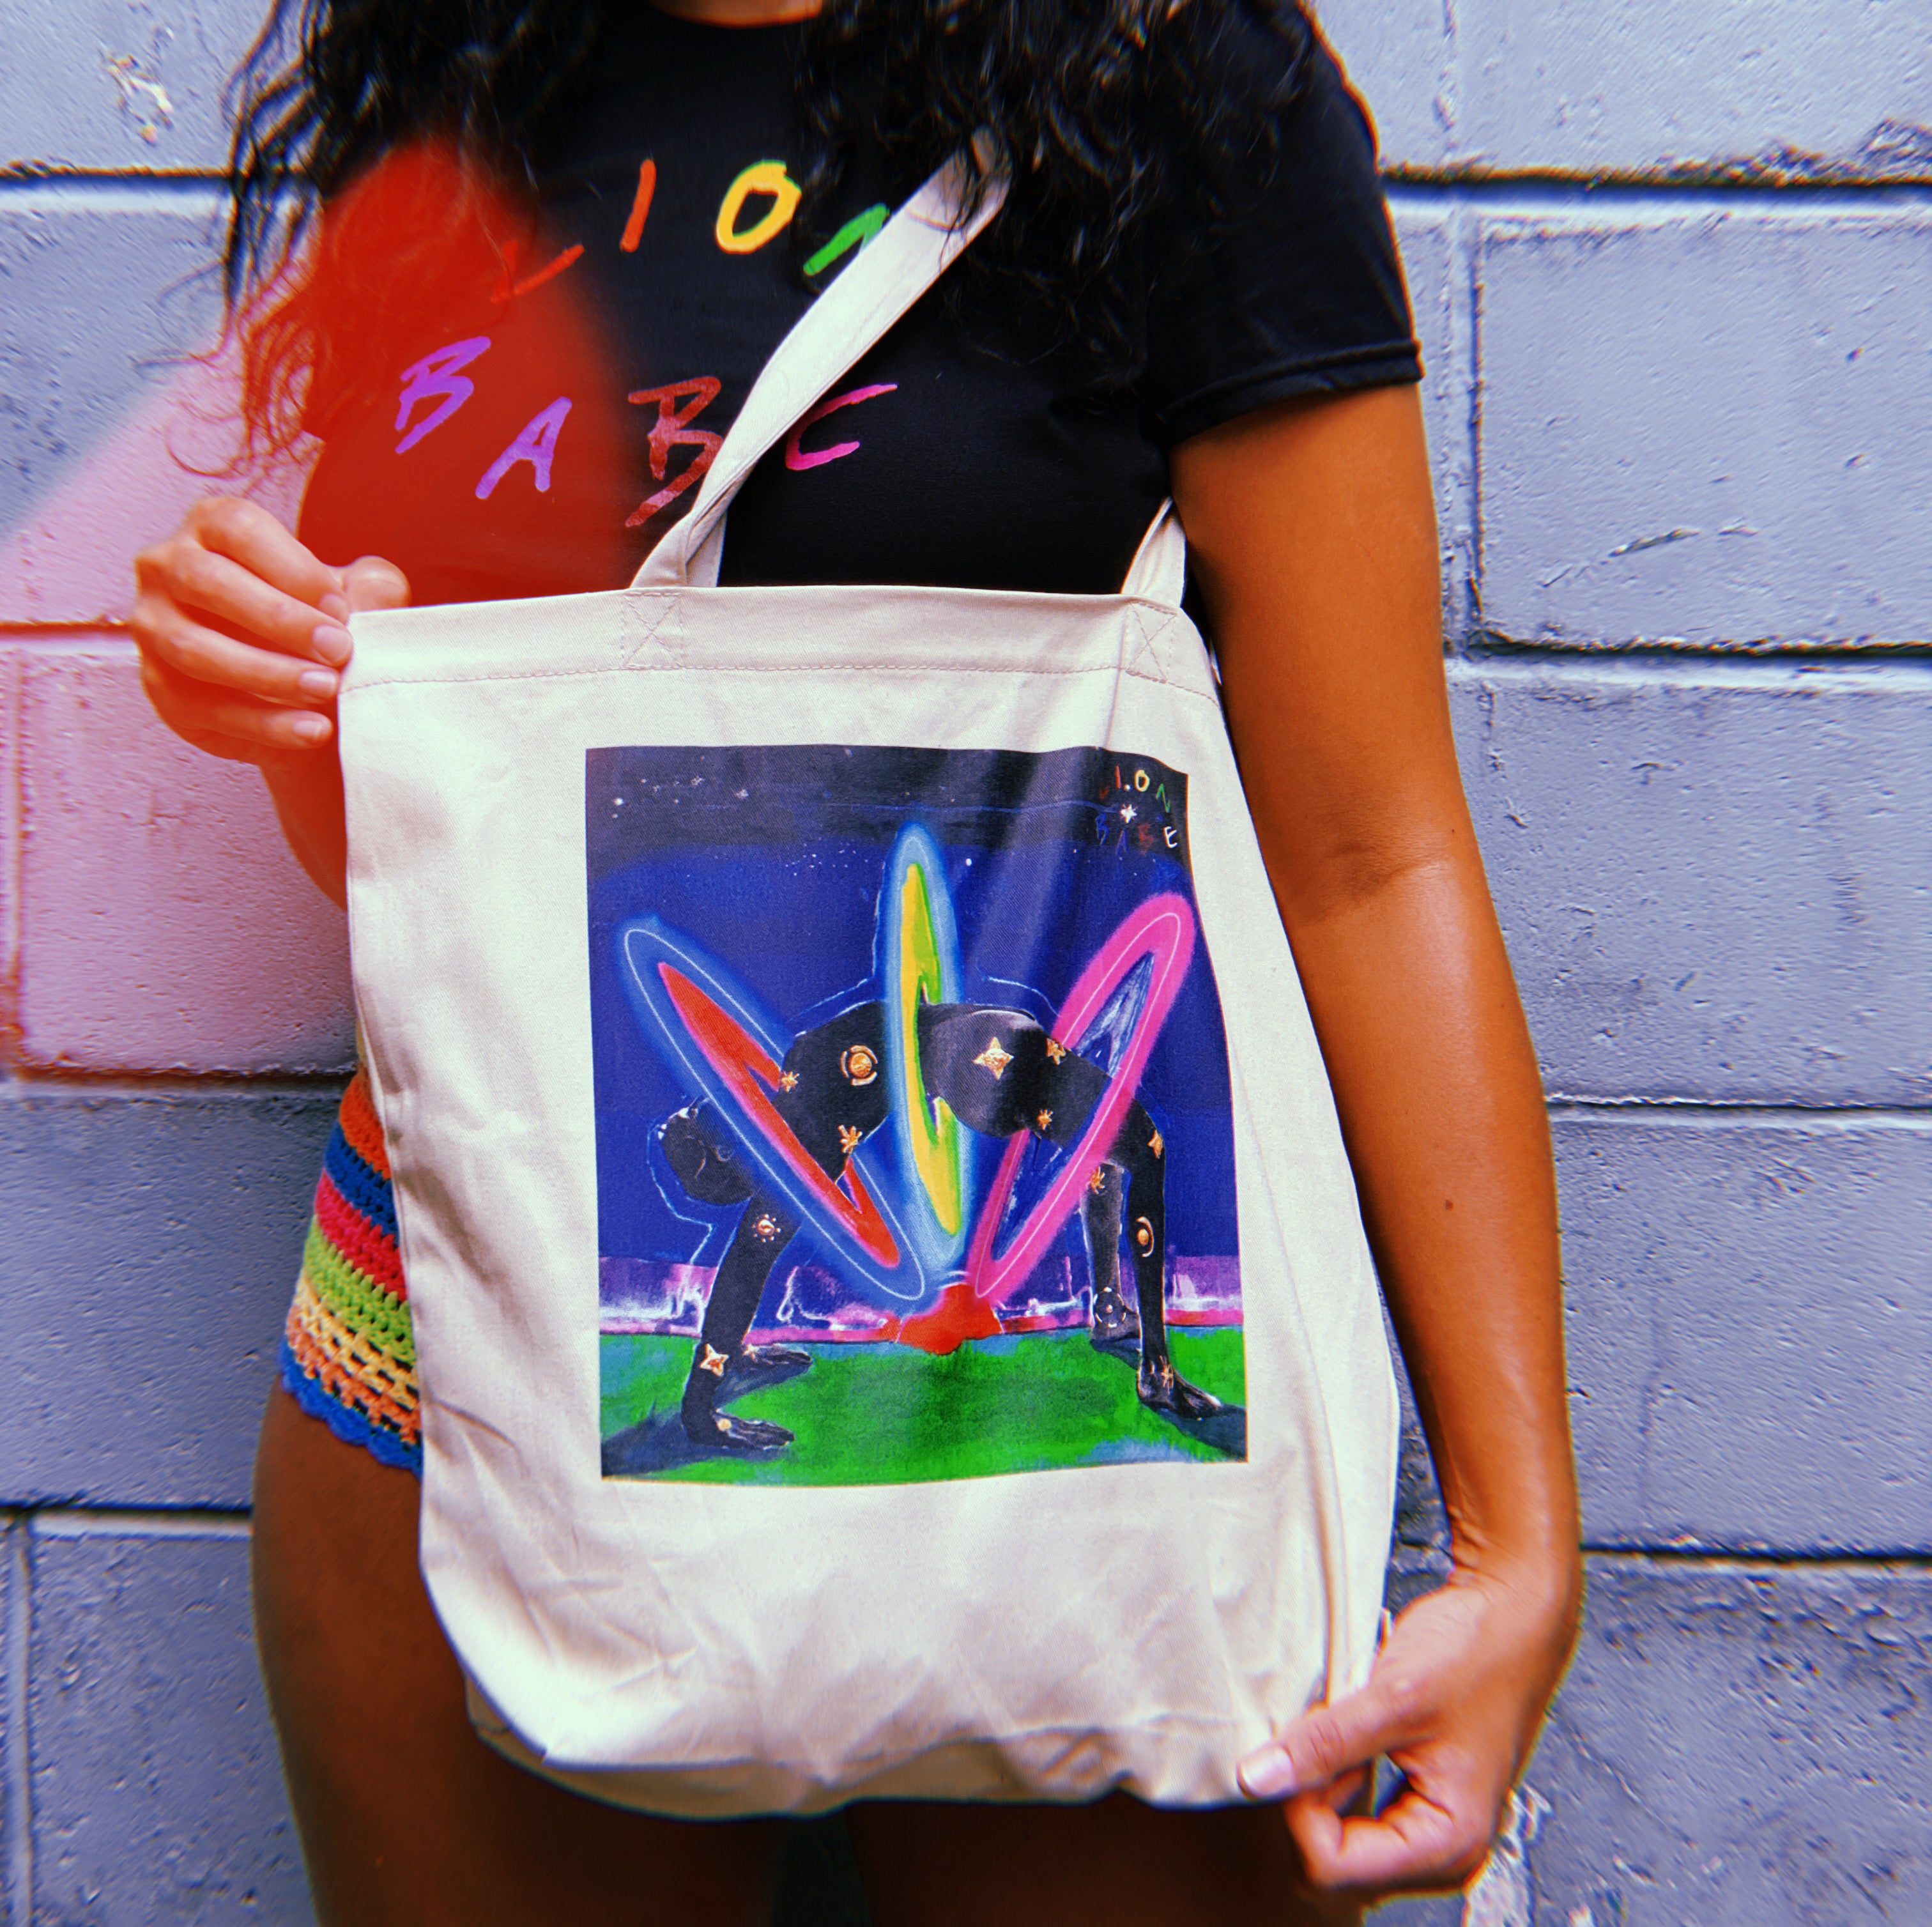 LION BABE "Rainbow Child" cover art Tote Bag